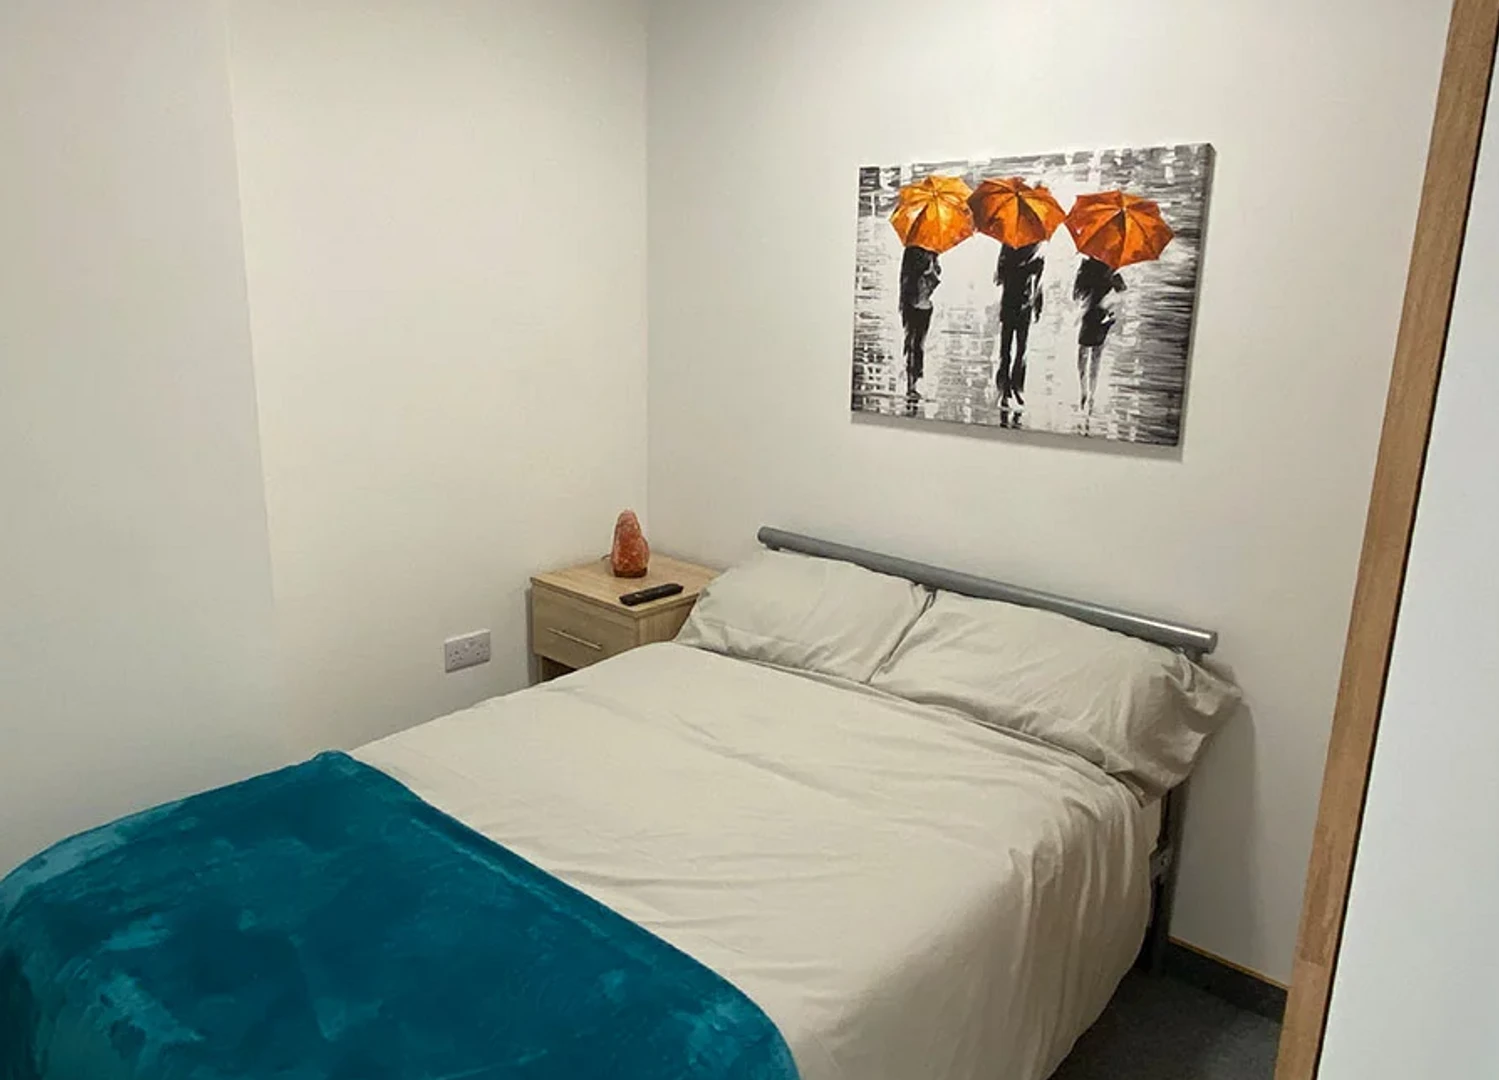 Studio for 2 people in Leicester